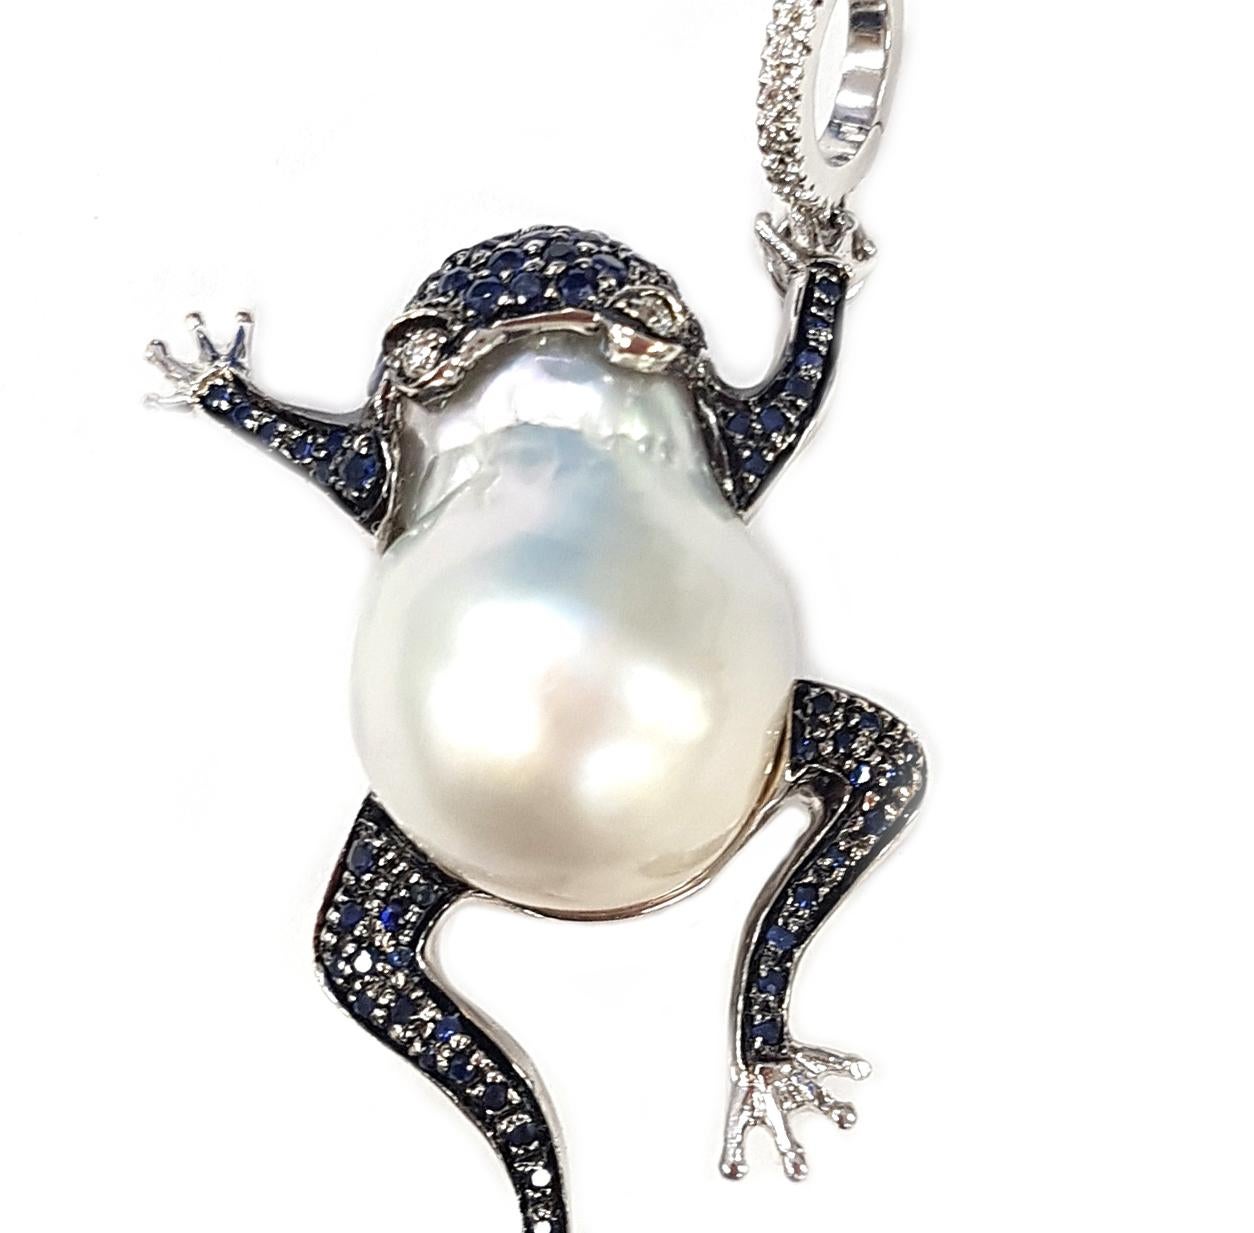 This lovely pendant is made of a large white Australian pearl which has been made into a leaping frog's body. The head and legs of the frog are set with gorgeous, midnight-blue sapphires while white diamonds create the lovely bright eyes of the